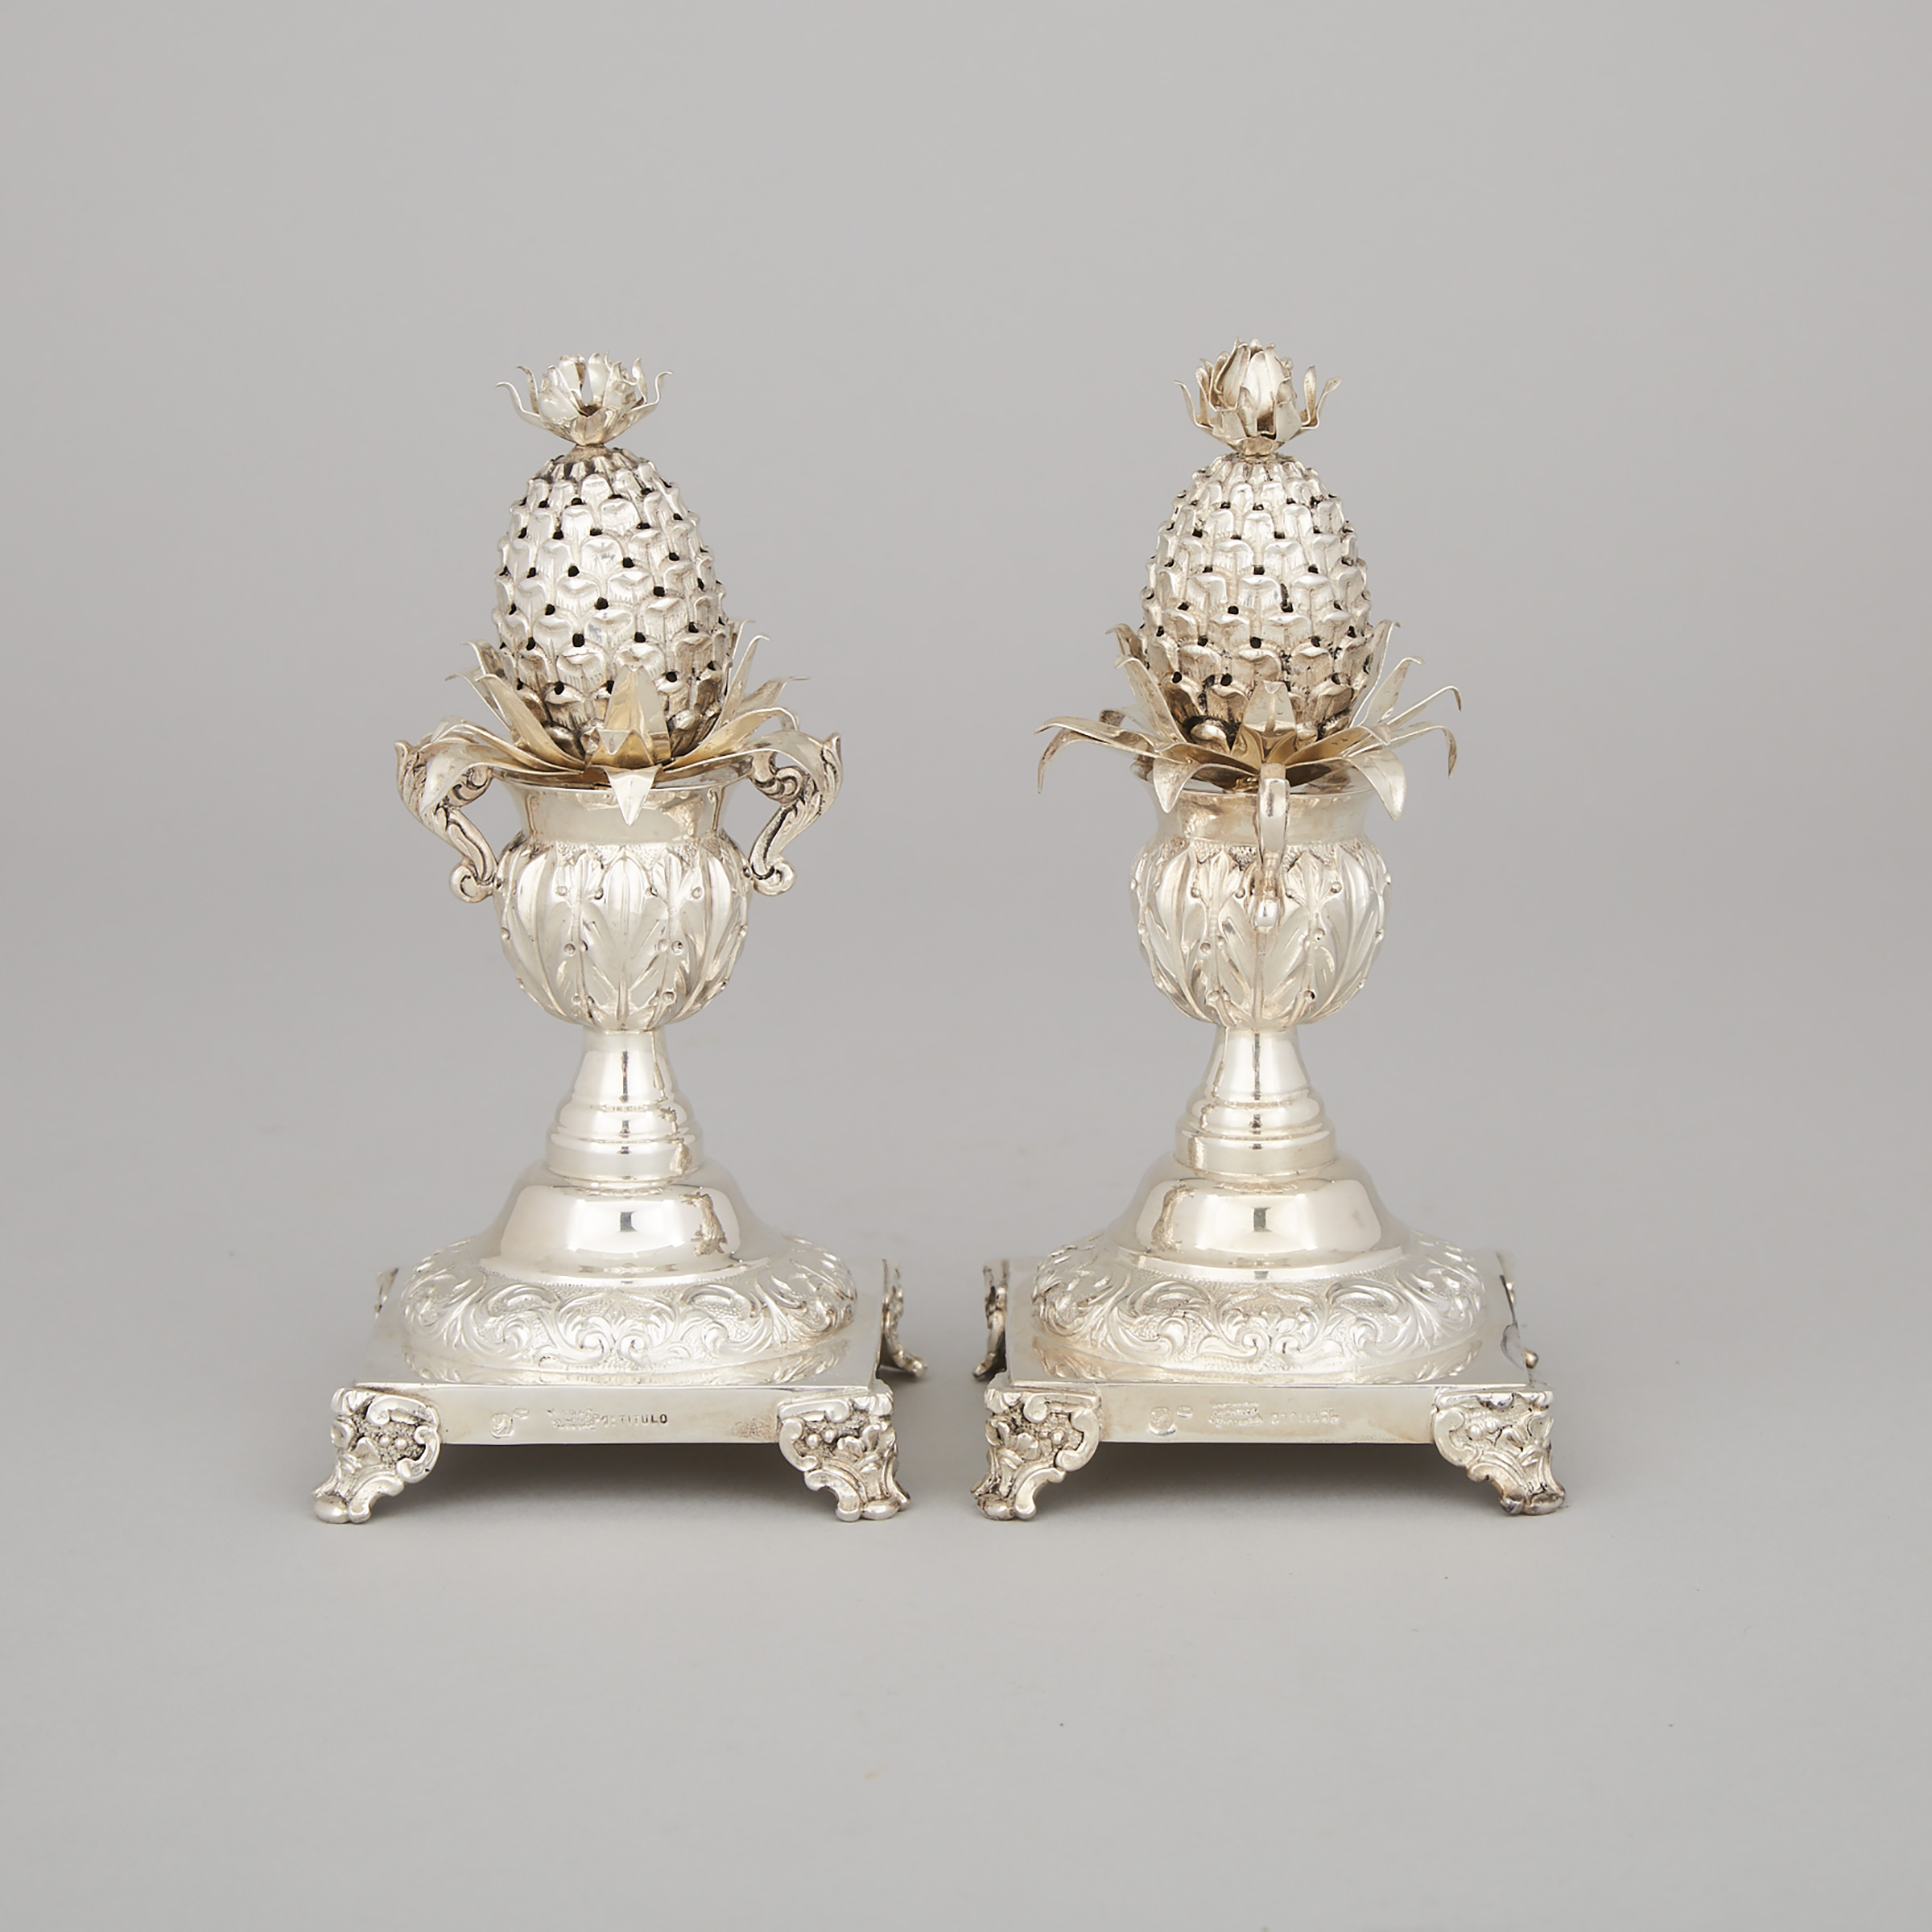 Pair of Portuguese Silver Pineapple Toothpick Holders, Oporto, 20th century